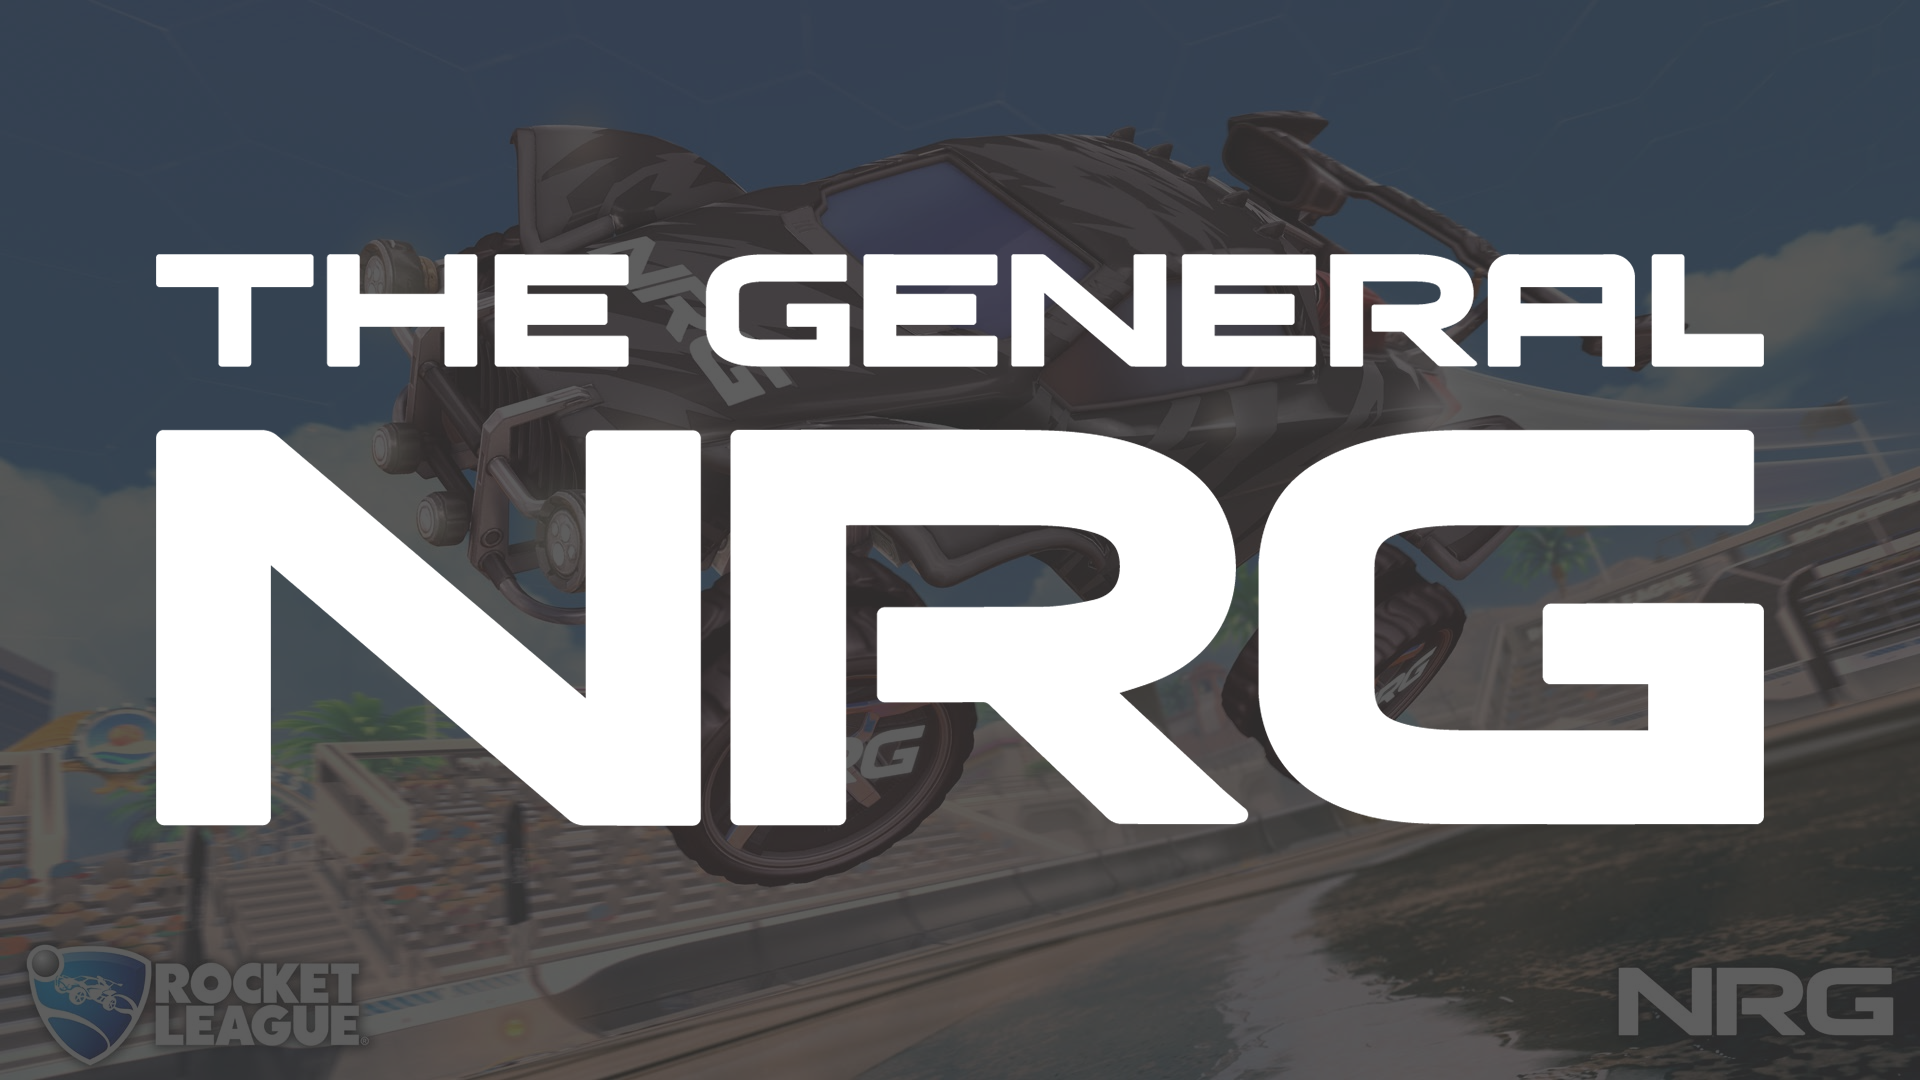 Nrg Rocket League Team Rename To The General Ggrecon